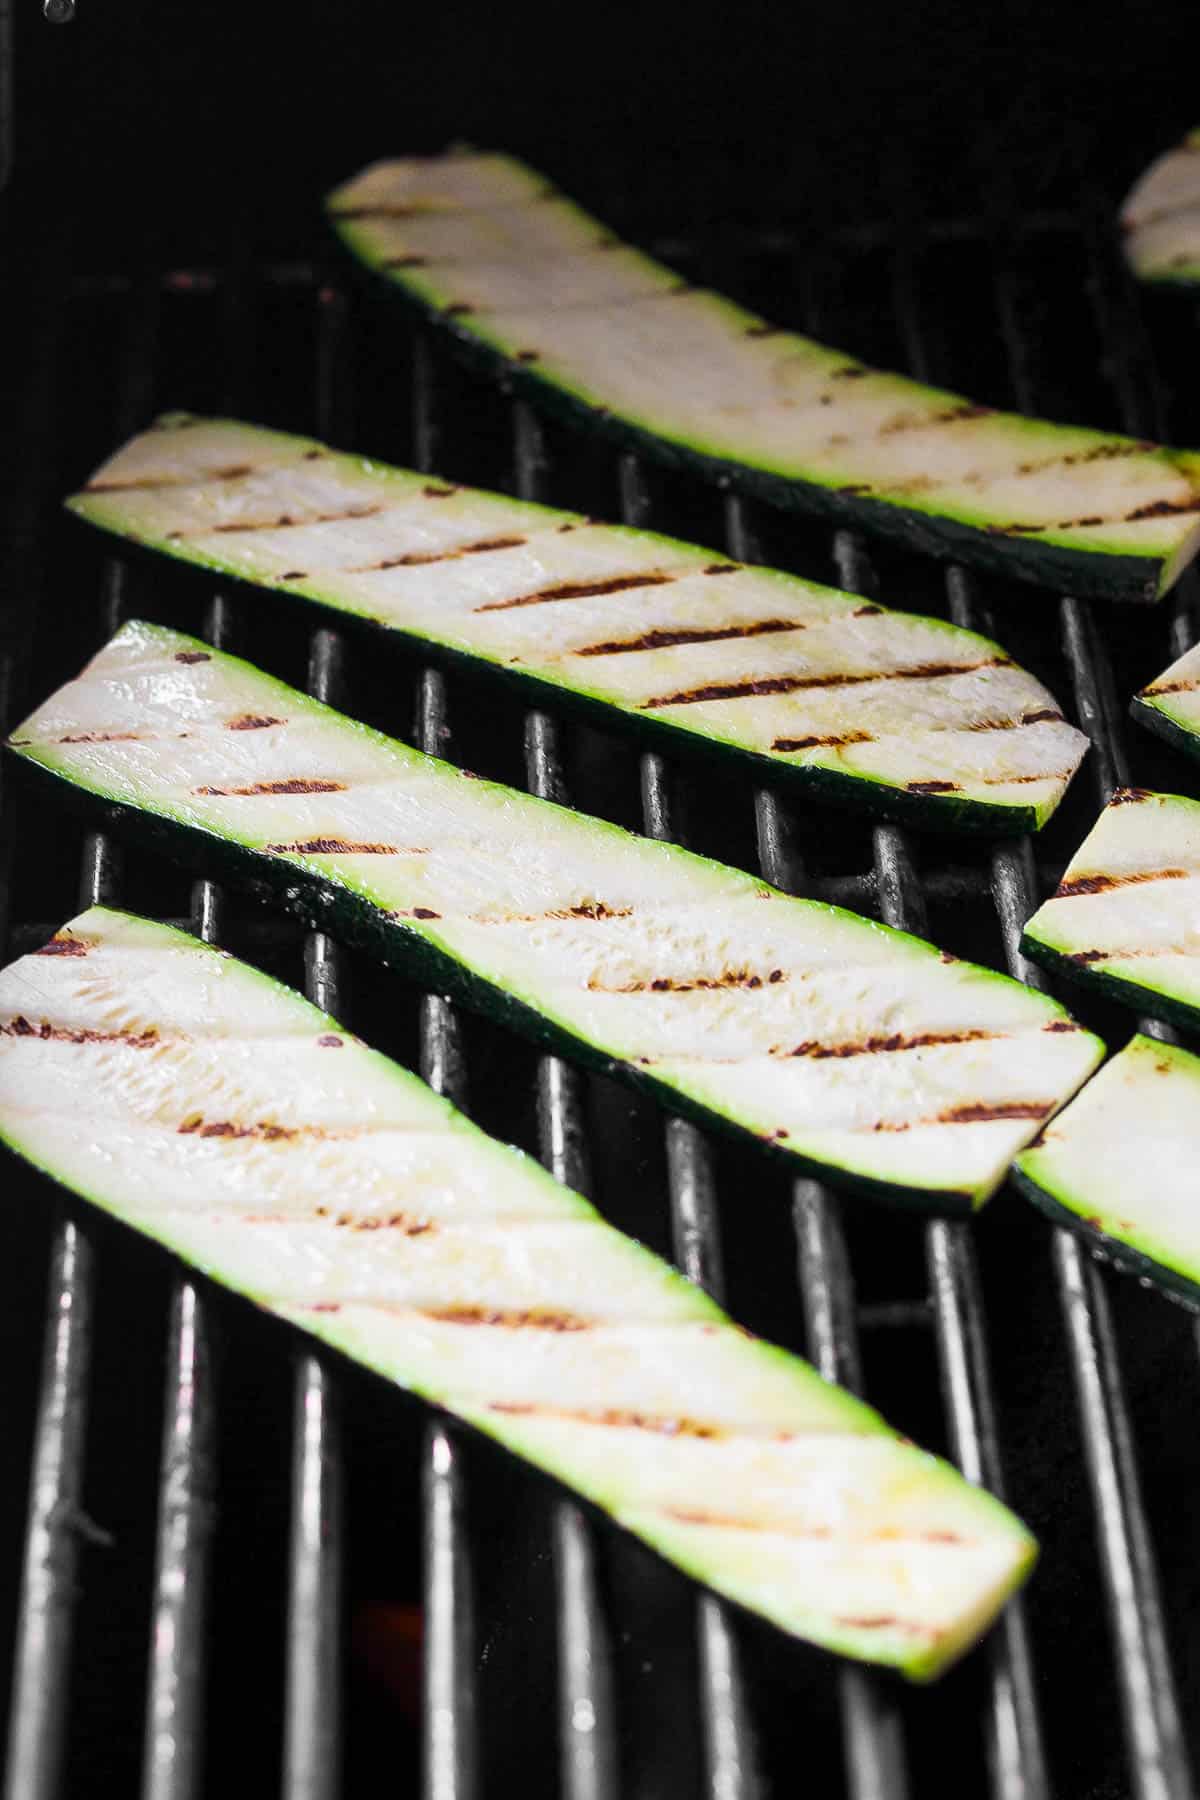 Zucchini planks on the grill.